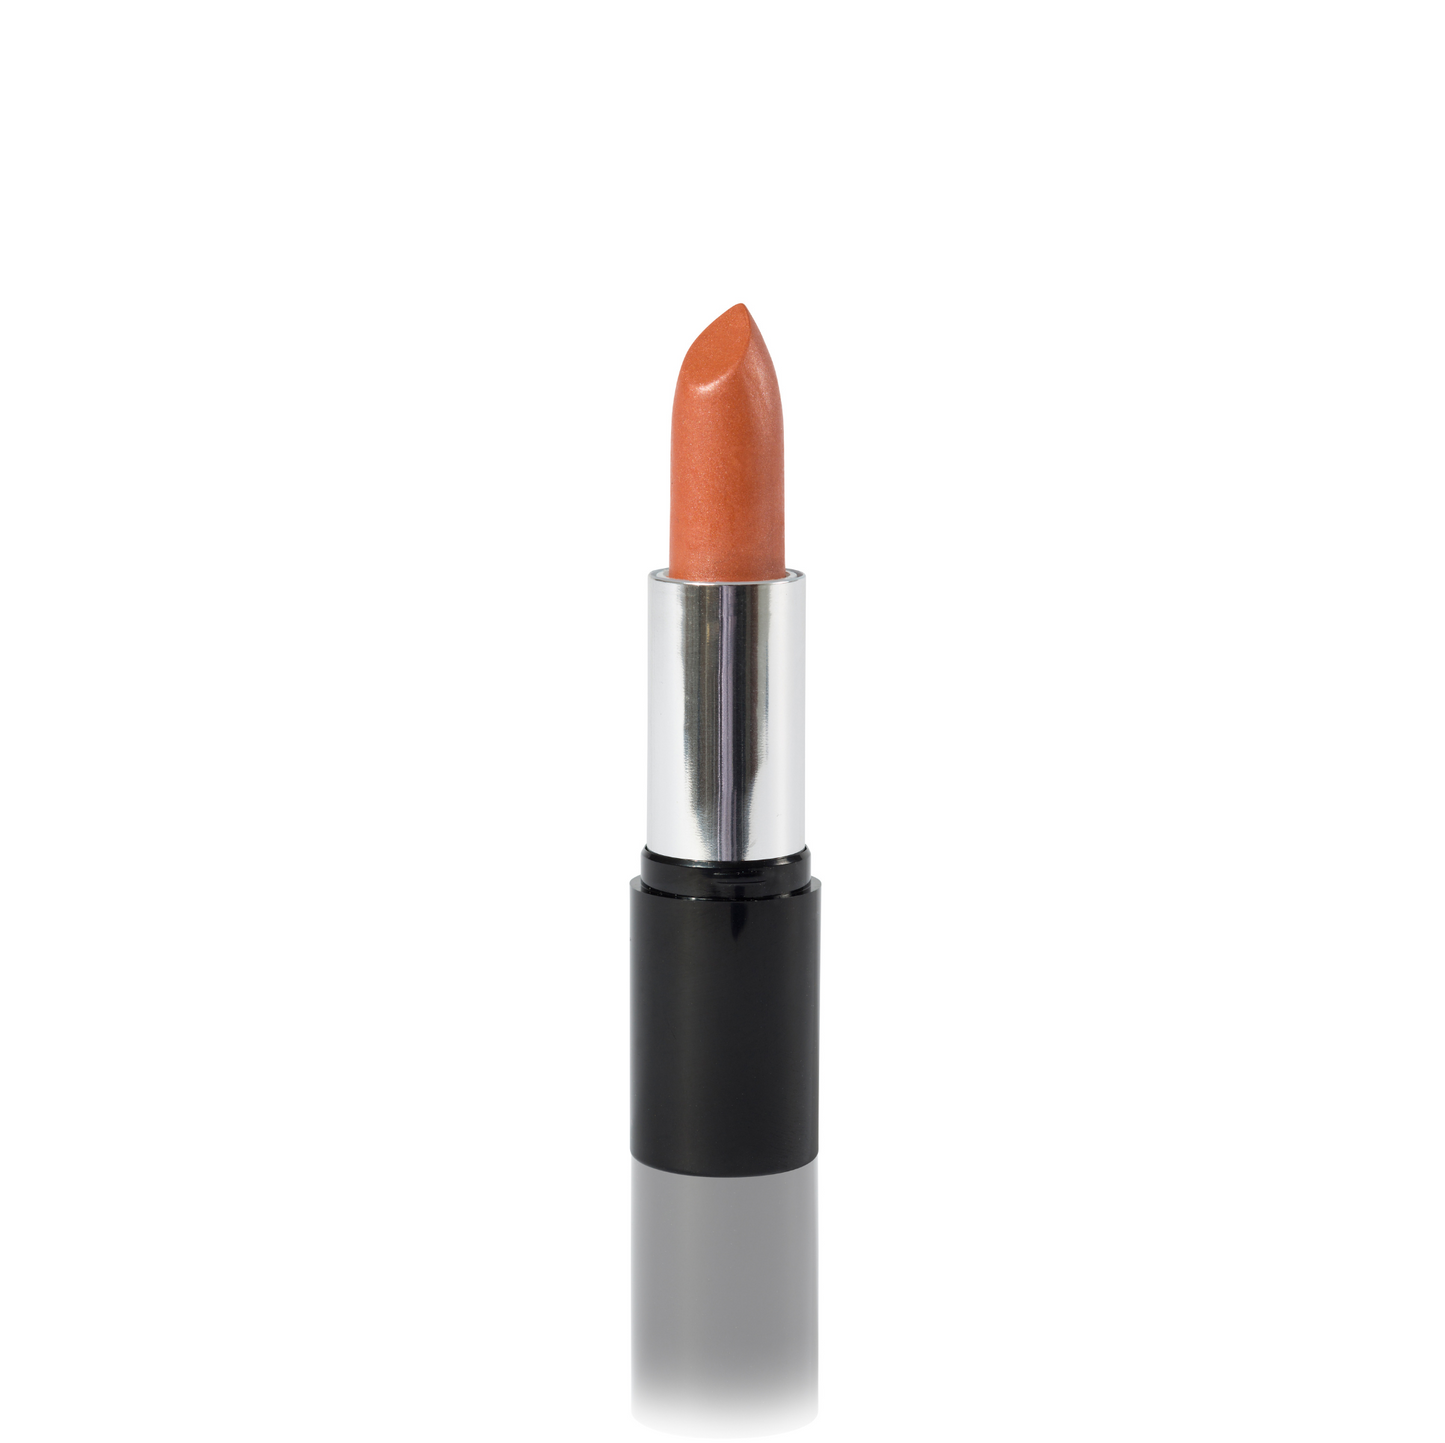 A single tube of the odylique apricot sorbet organic mineral lipstick with the cap removed, revealing the orange shade, set against a plain white background.